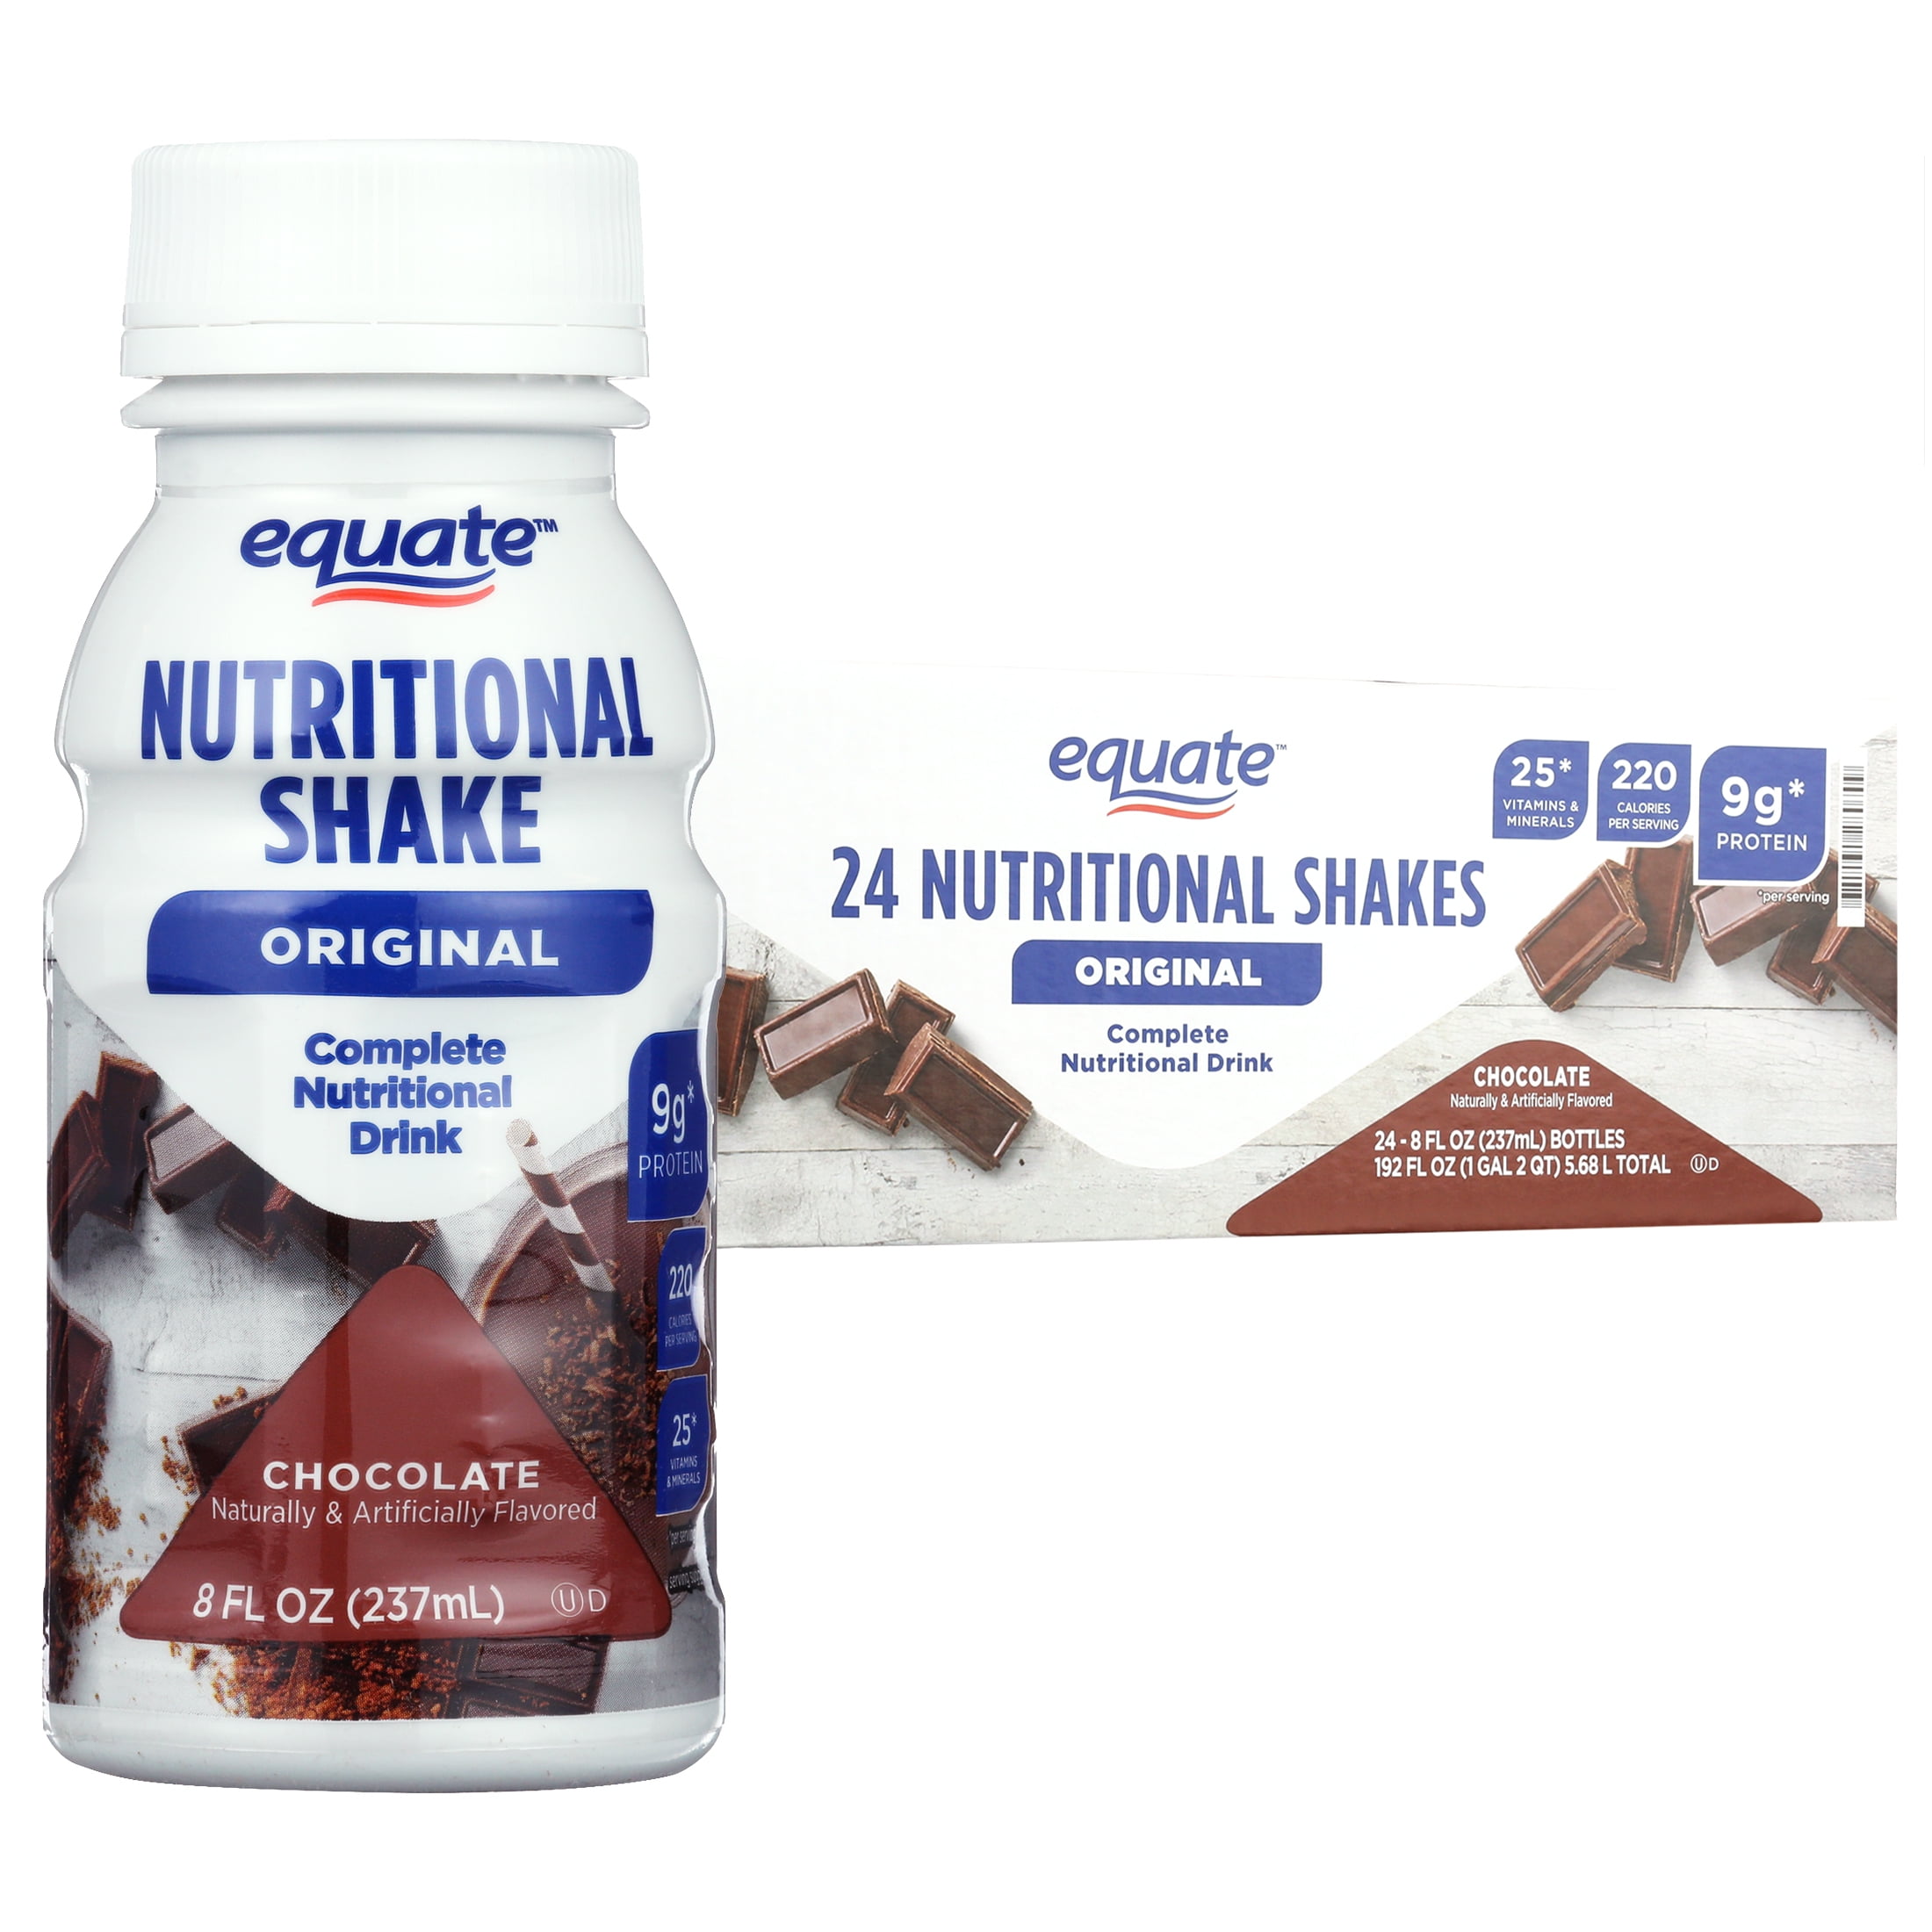 Equate Original Meal Replacement Nutritional Shakes, Chocolate, 8 fl oz, 24 Count